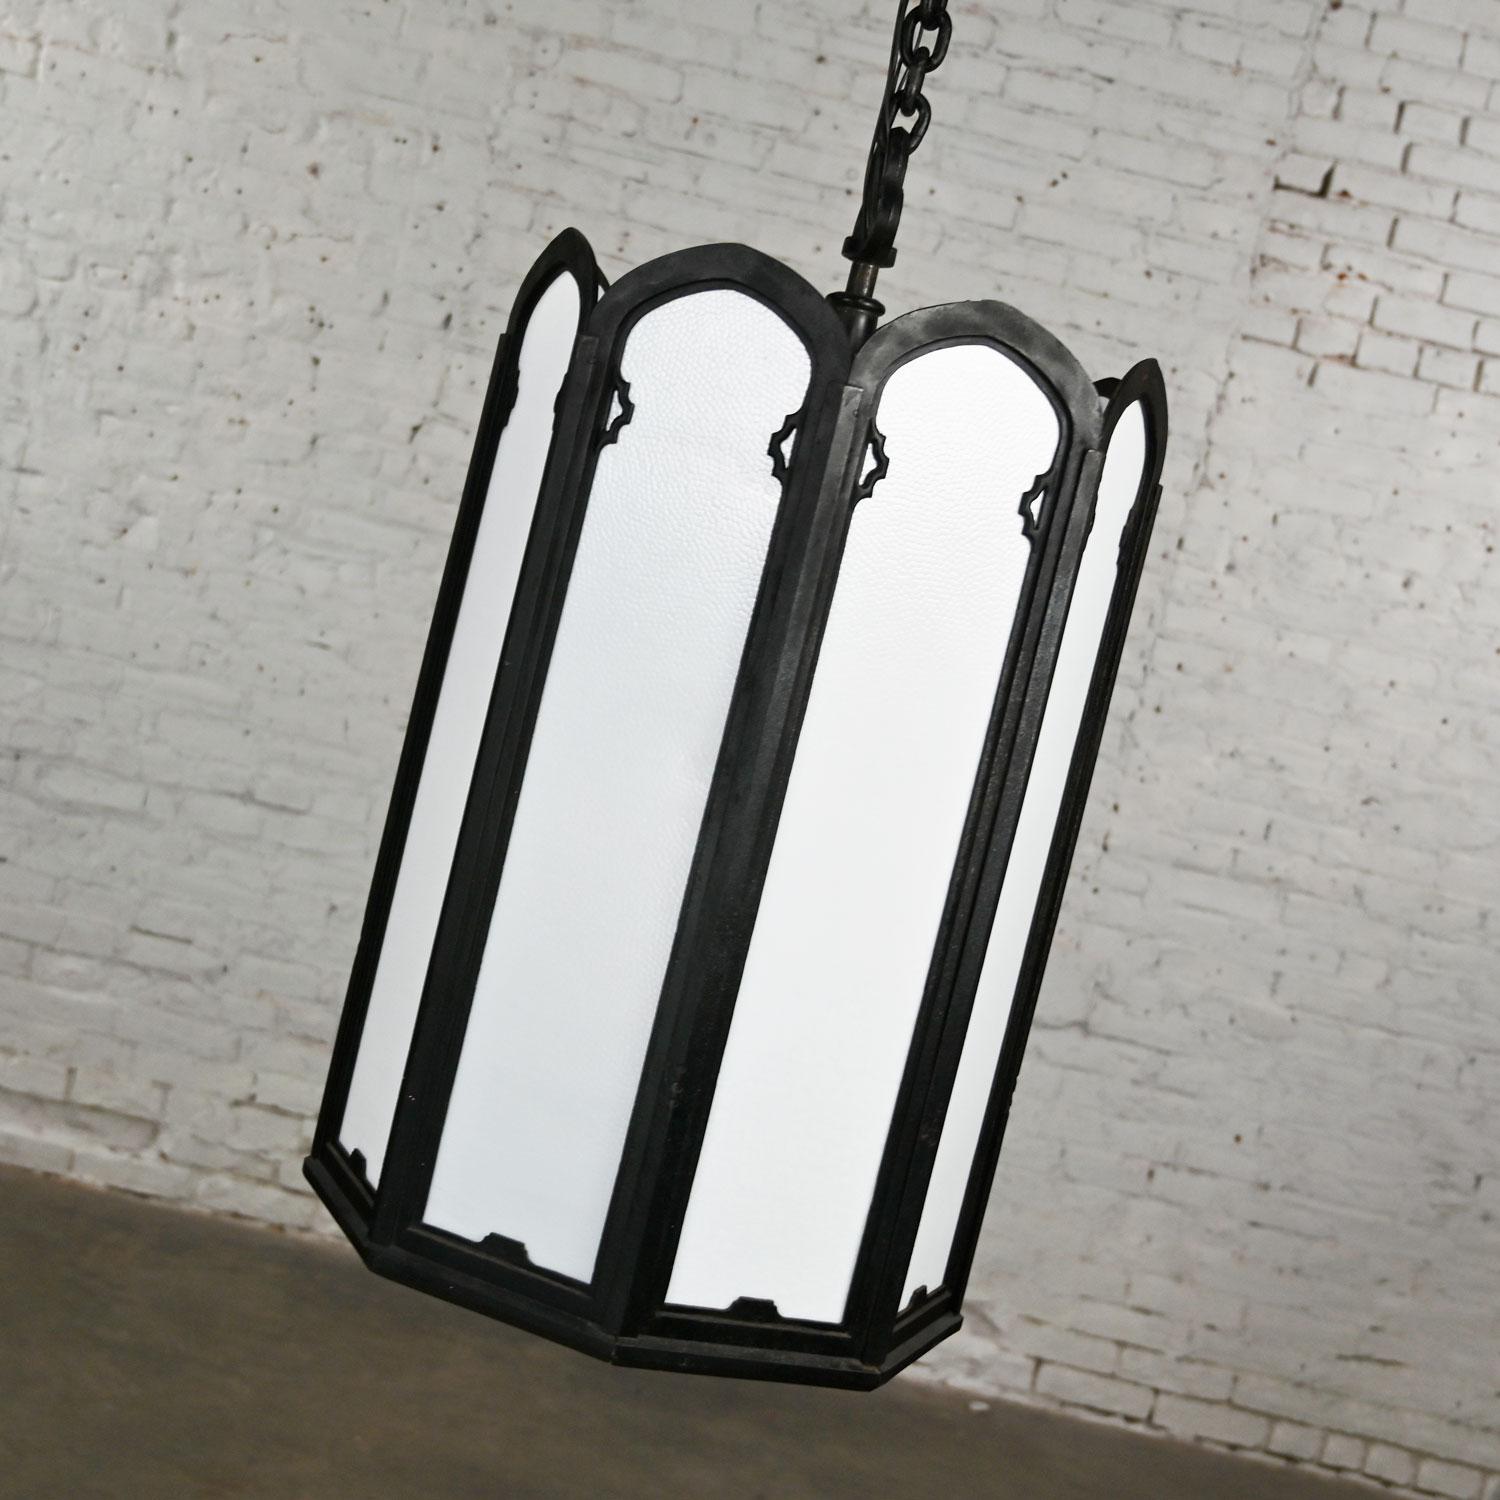 Large Vintage Gothic or Art Deco Black Wrought Iron & White Milk Glass Lights For Sale 2